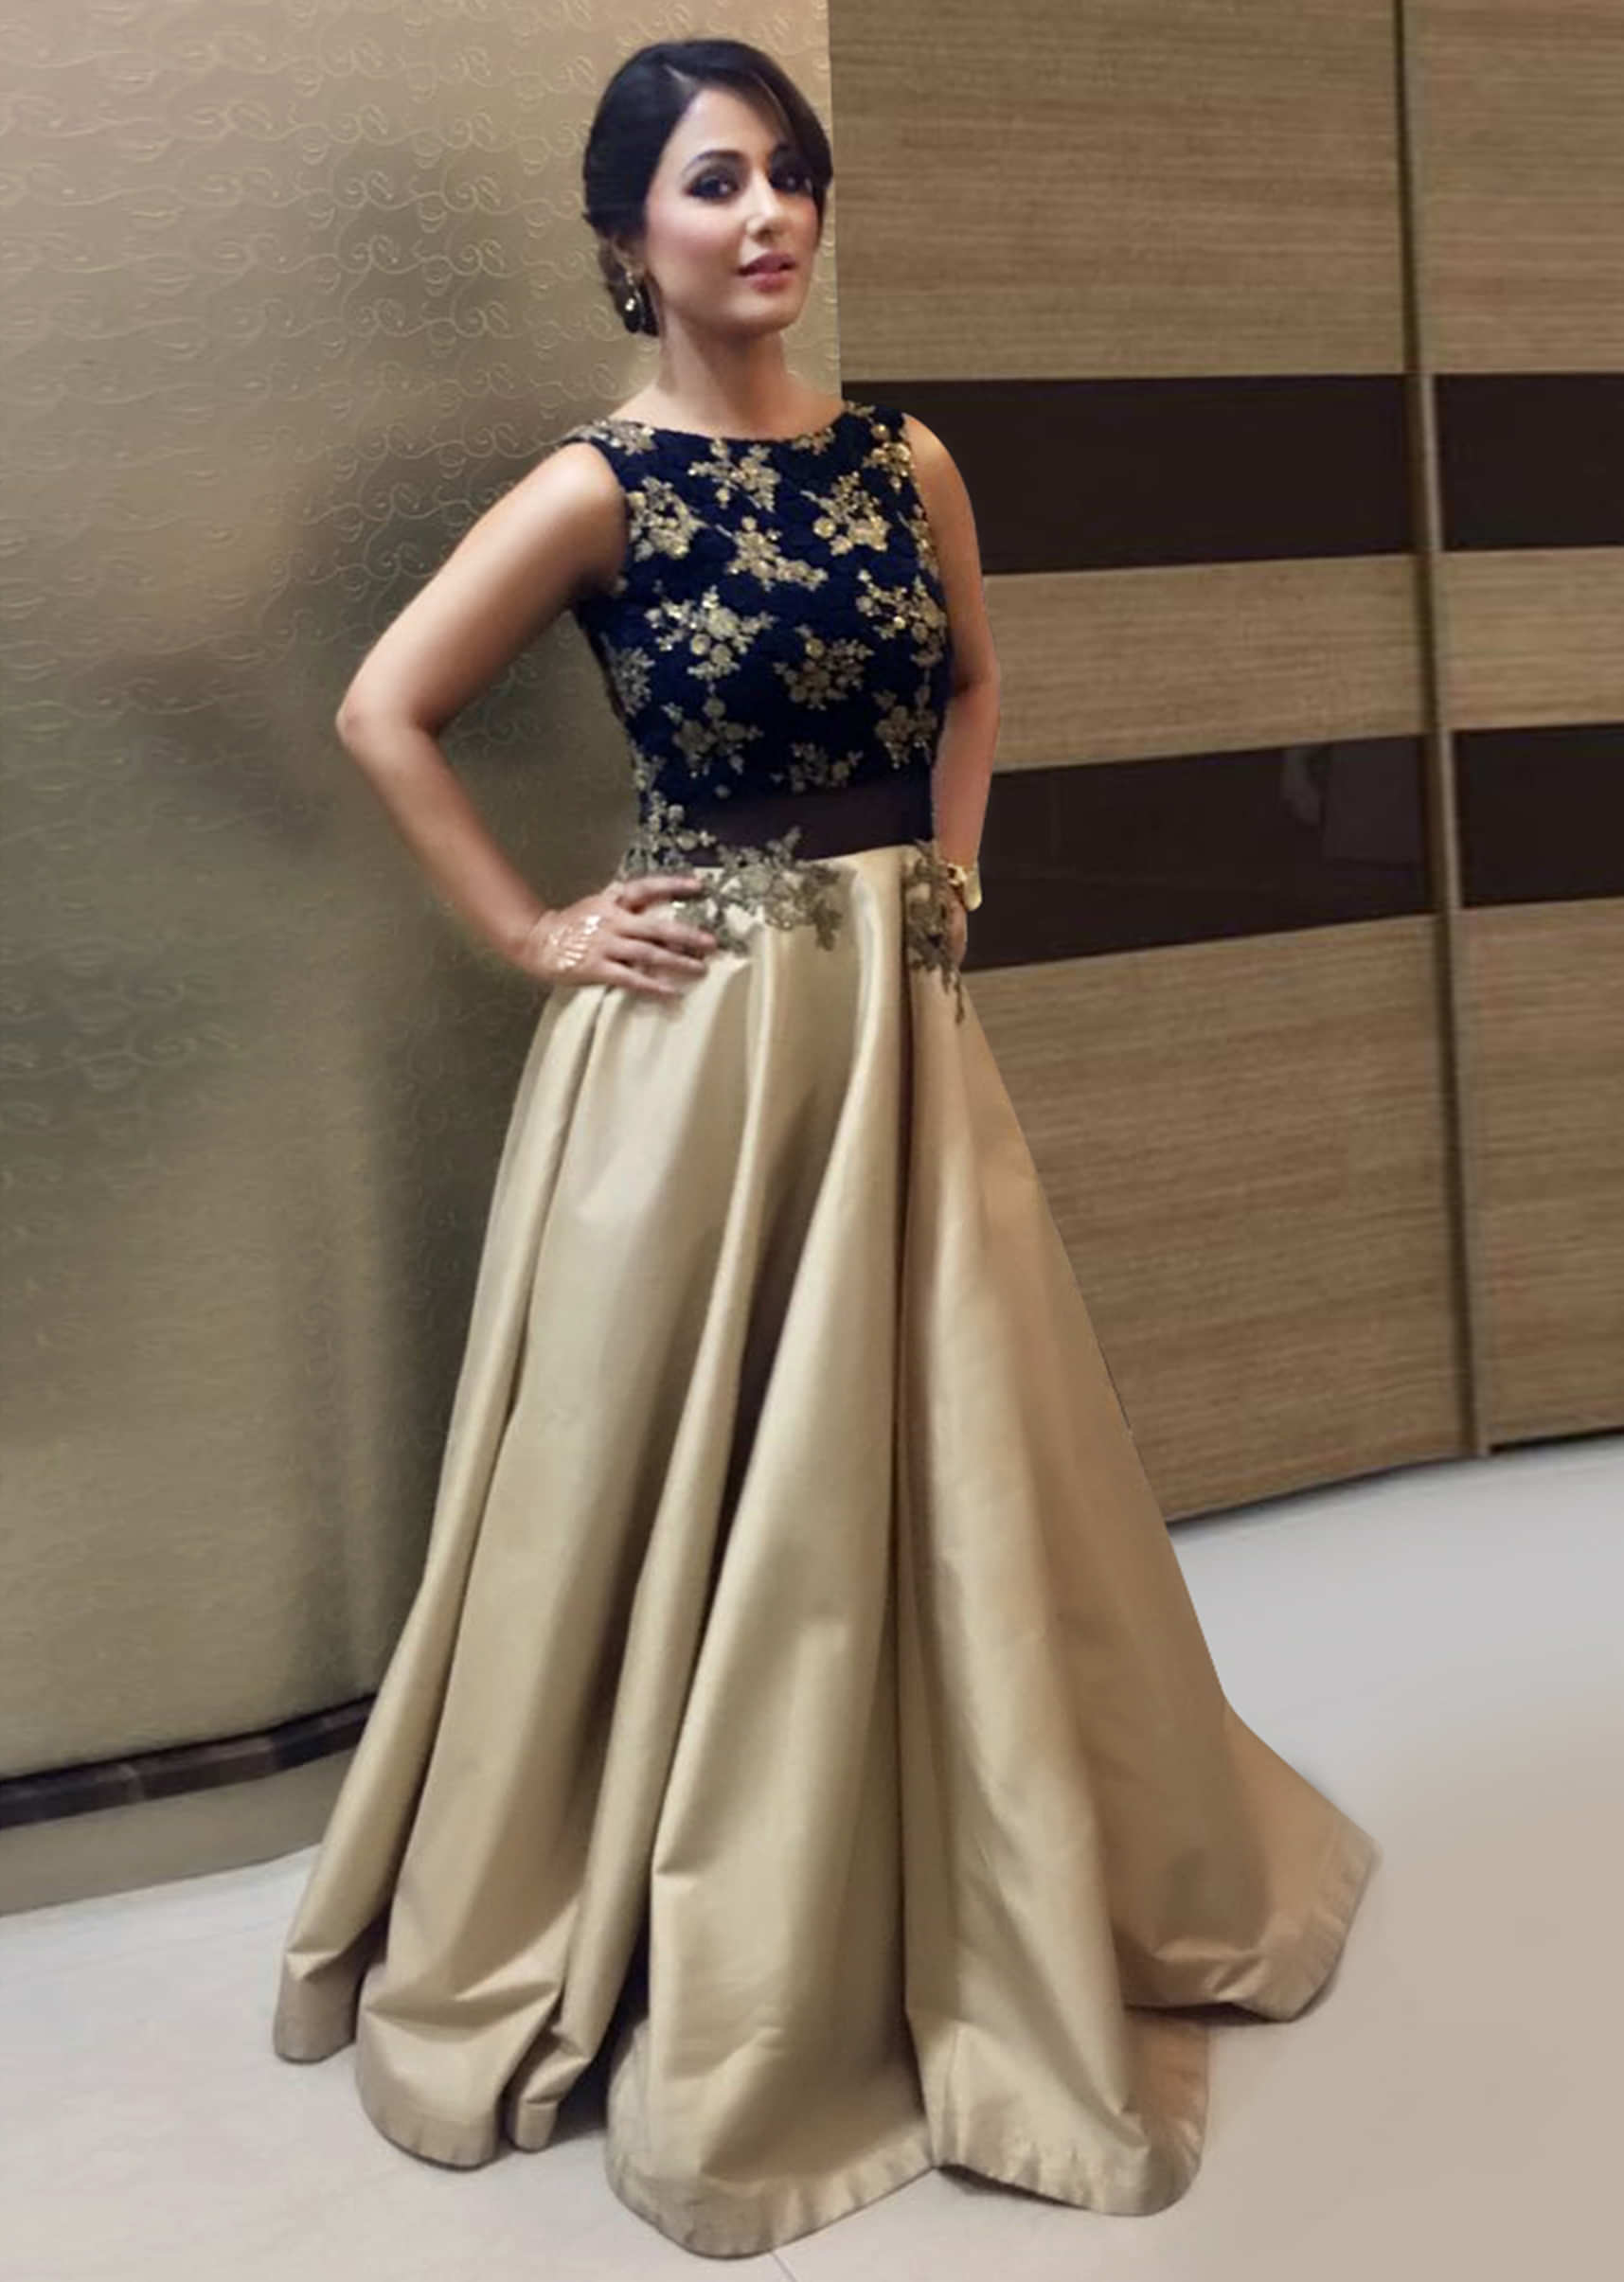 Hina Khan in Kalki light gold gown with paisley motif embroidery